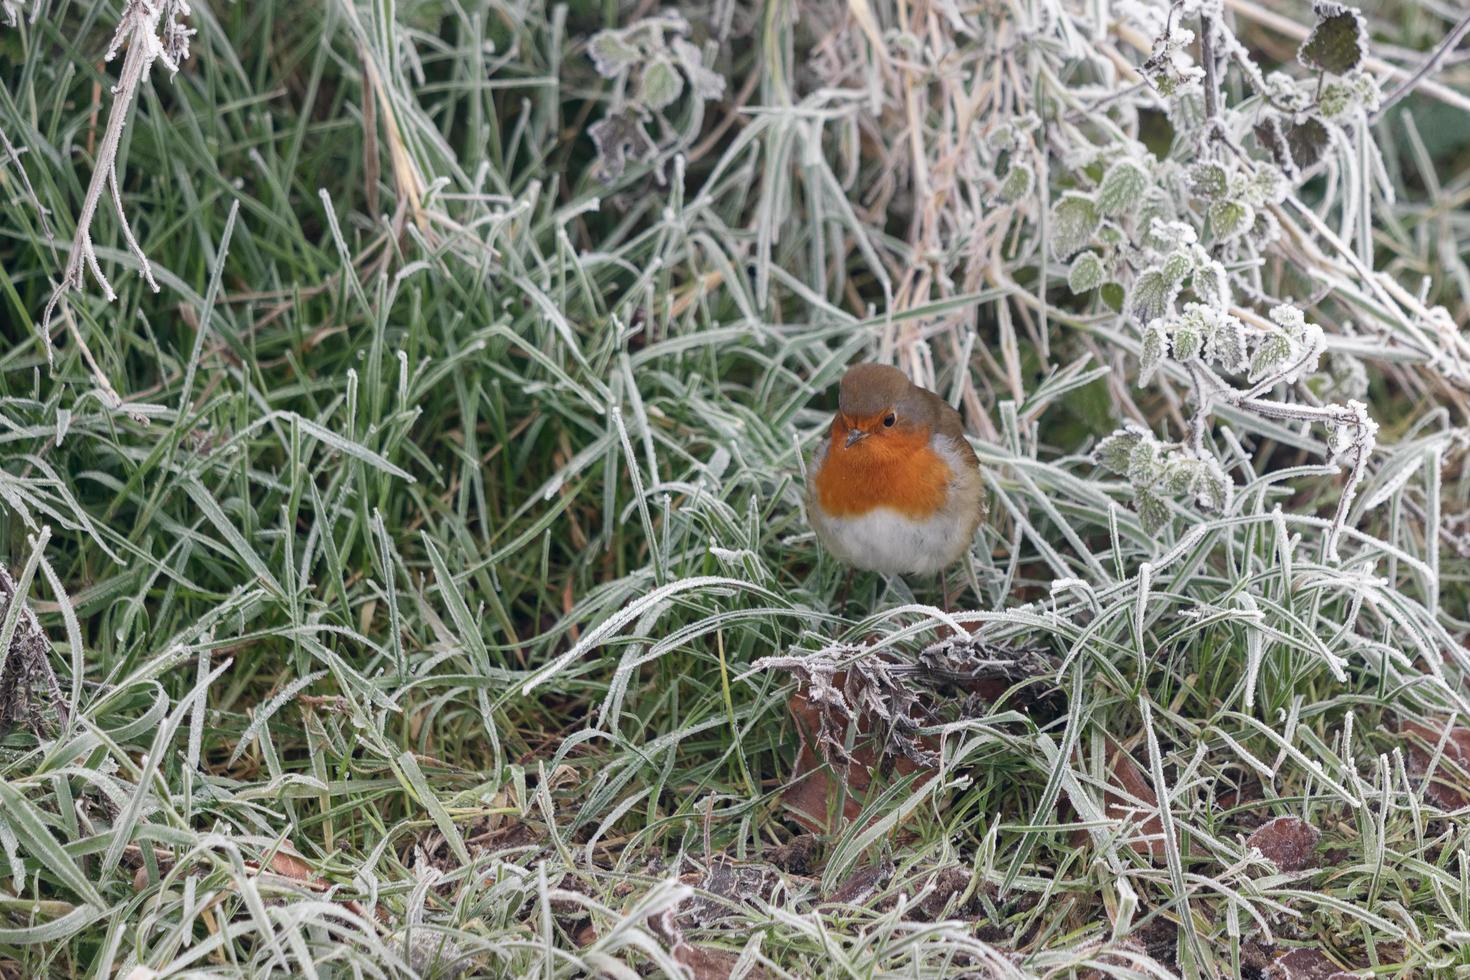 Close-up of an alert Robin standing in grass covered with hoar frost on a winters morning photo